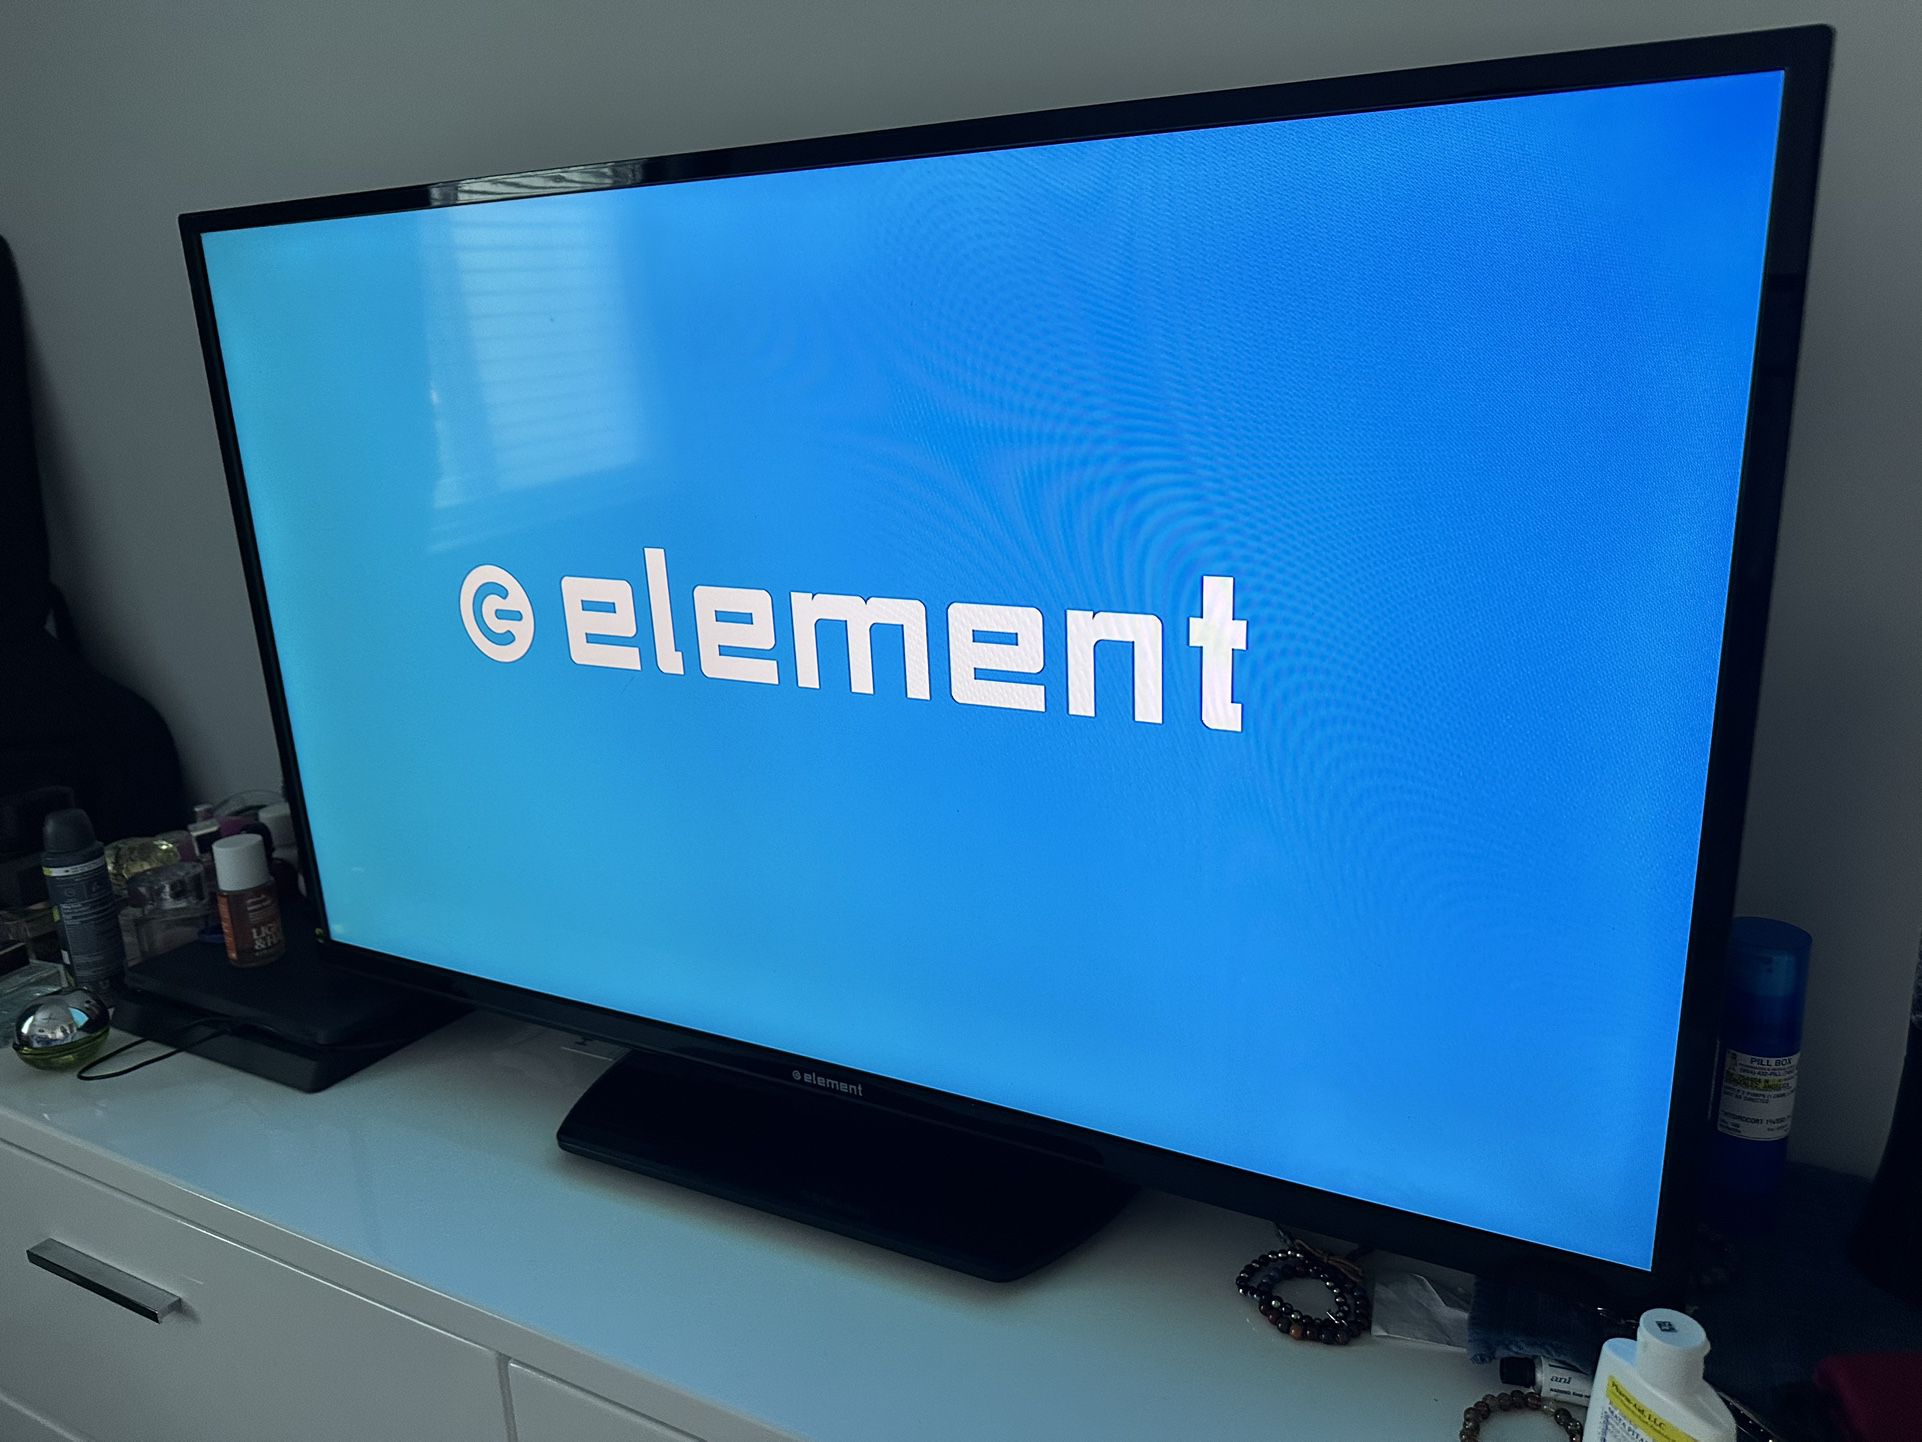 Element Tv (It is NOT Smart TV) but you can connect Apple TV and fire TV stick, it comes with a base included